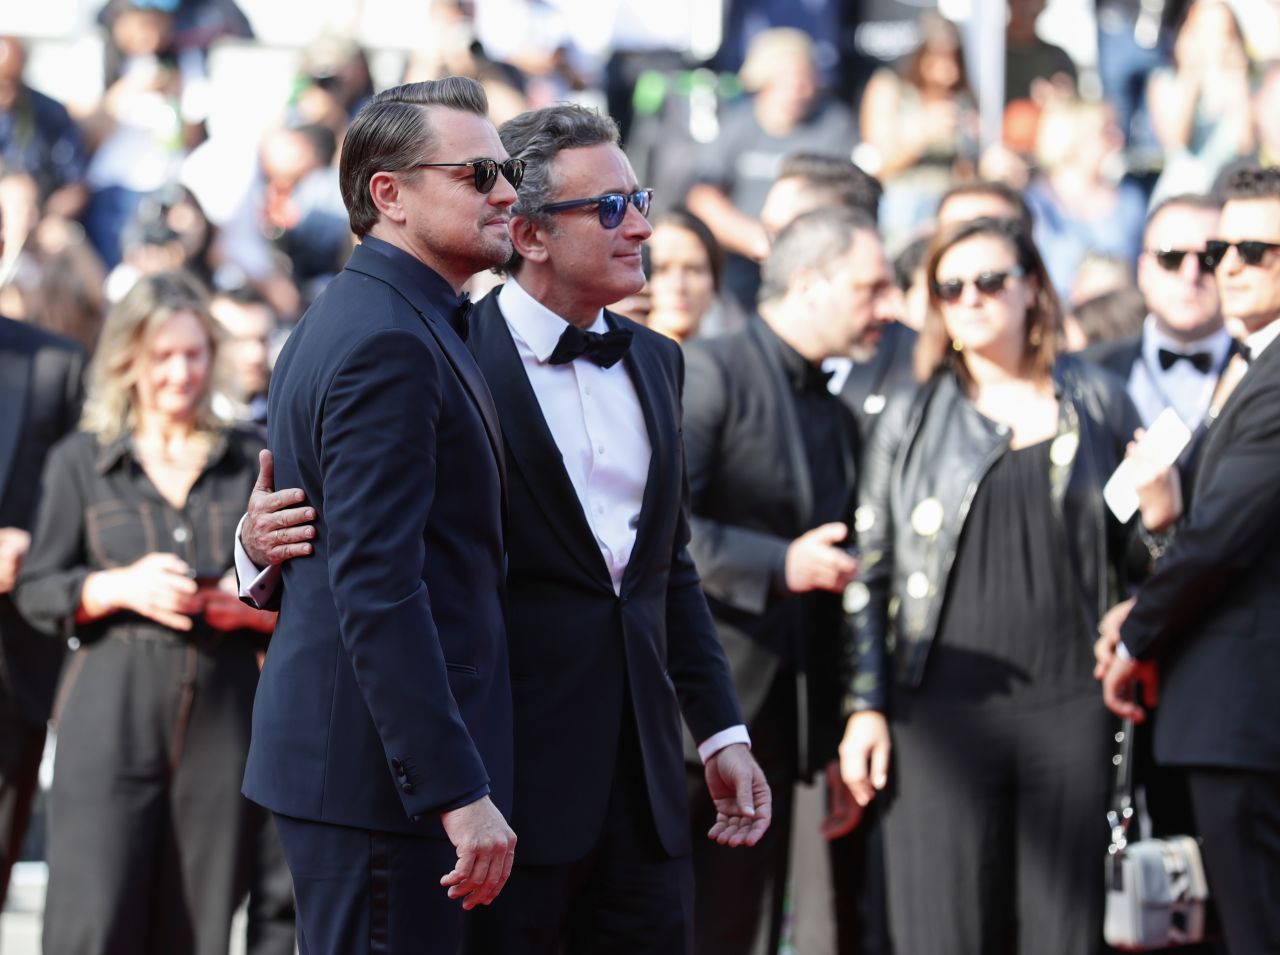 DiCaprio was also joined on the red carpet by Formula E CEO Alejandro Agag as the new sport continues to grow in popularity. 